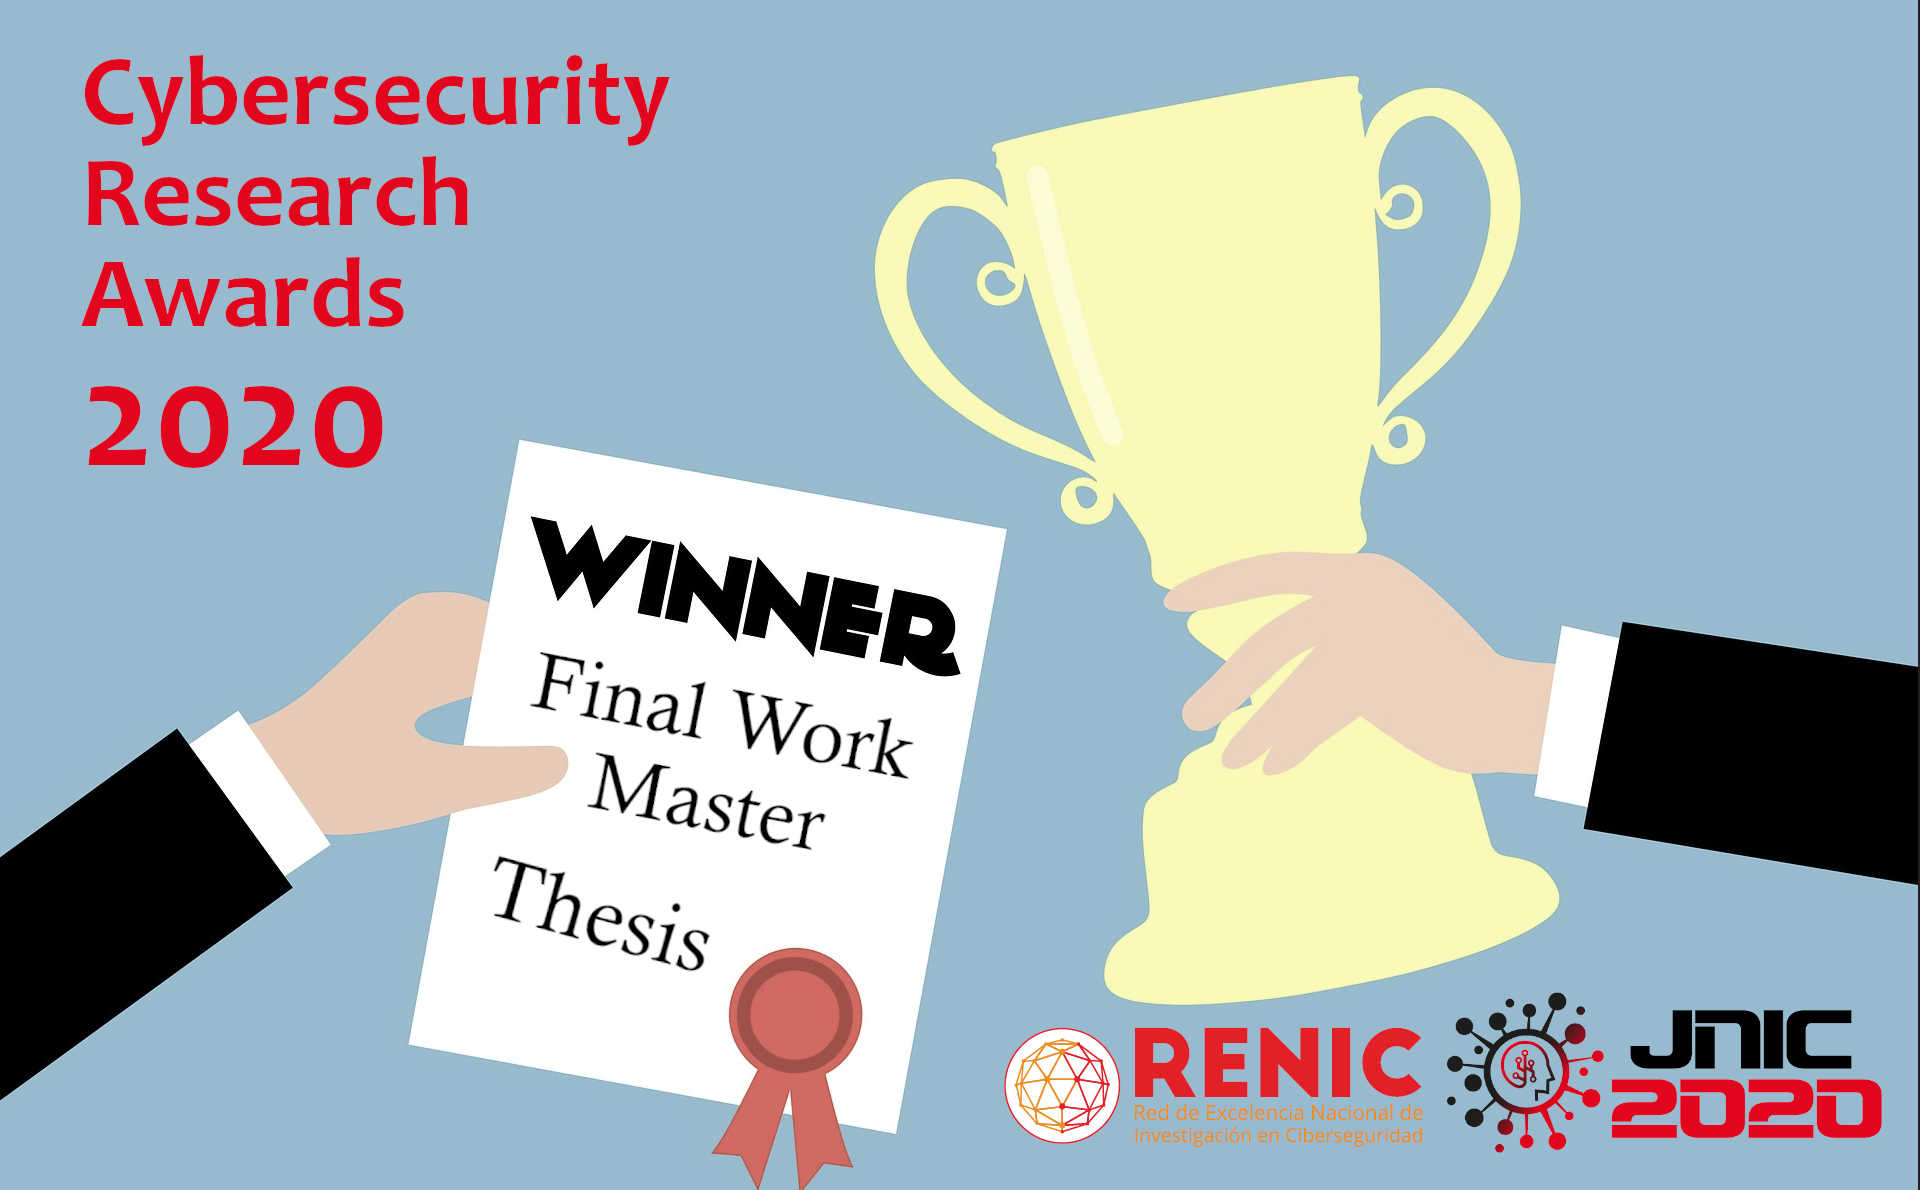 Cybersecurity Research Awards 2020 convened